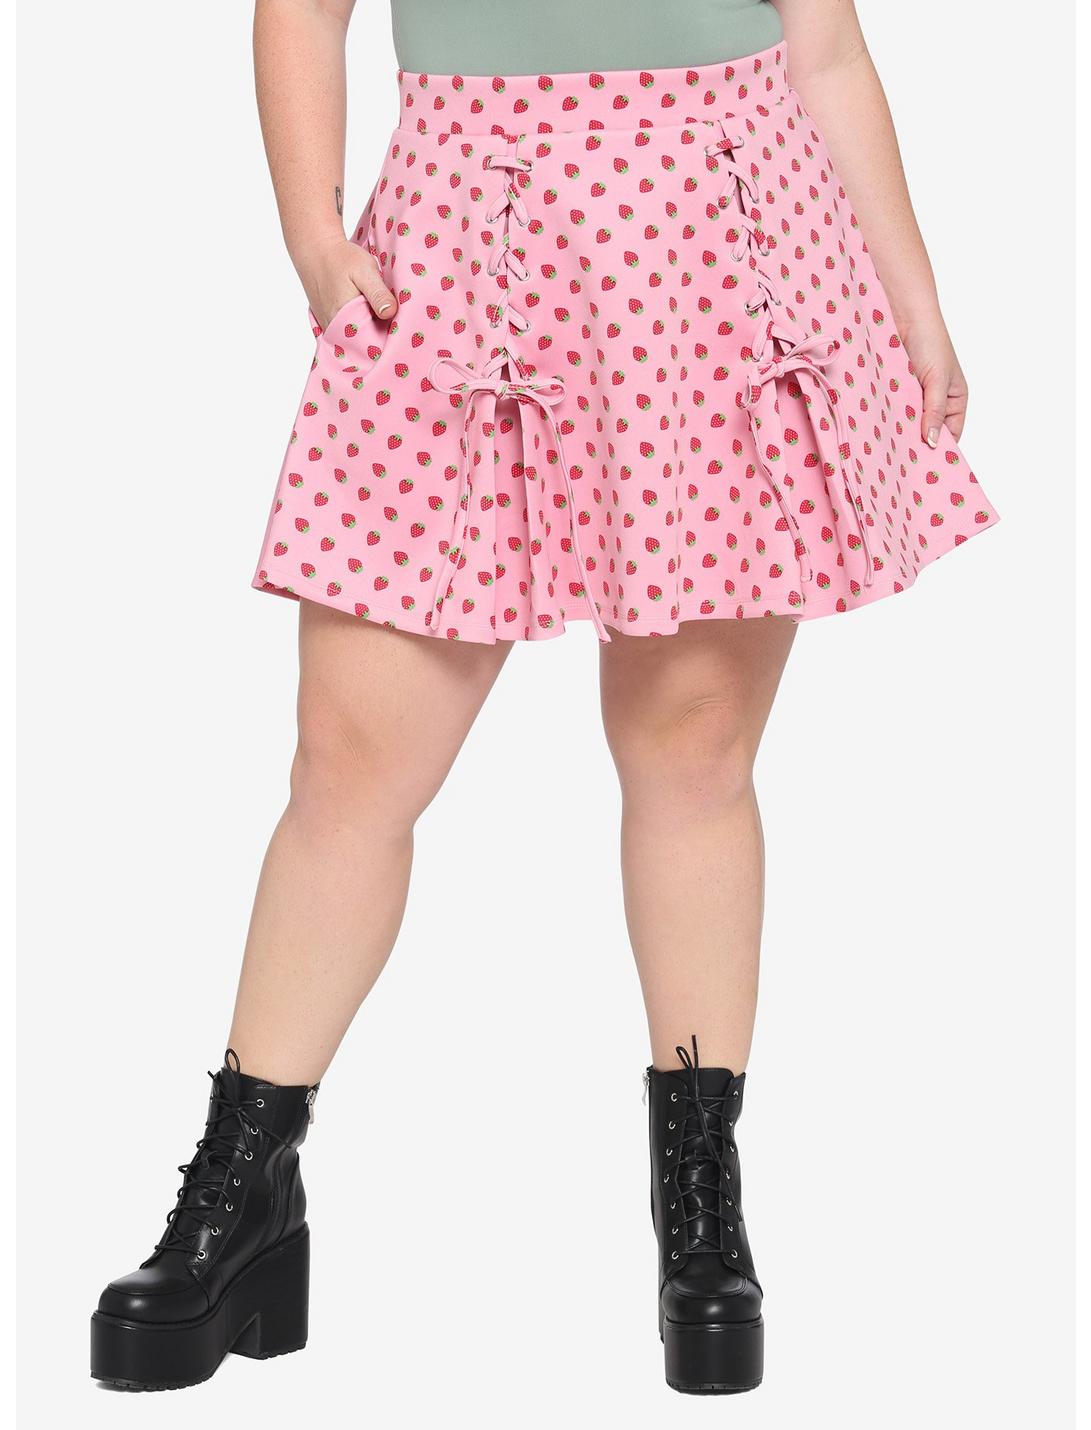 Strawberry Lace-Up Skirt Plus Size, PINK, hi-res